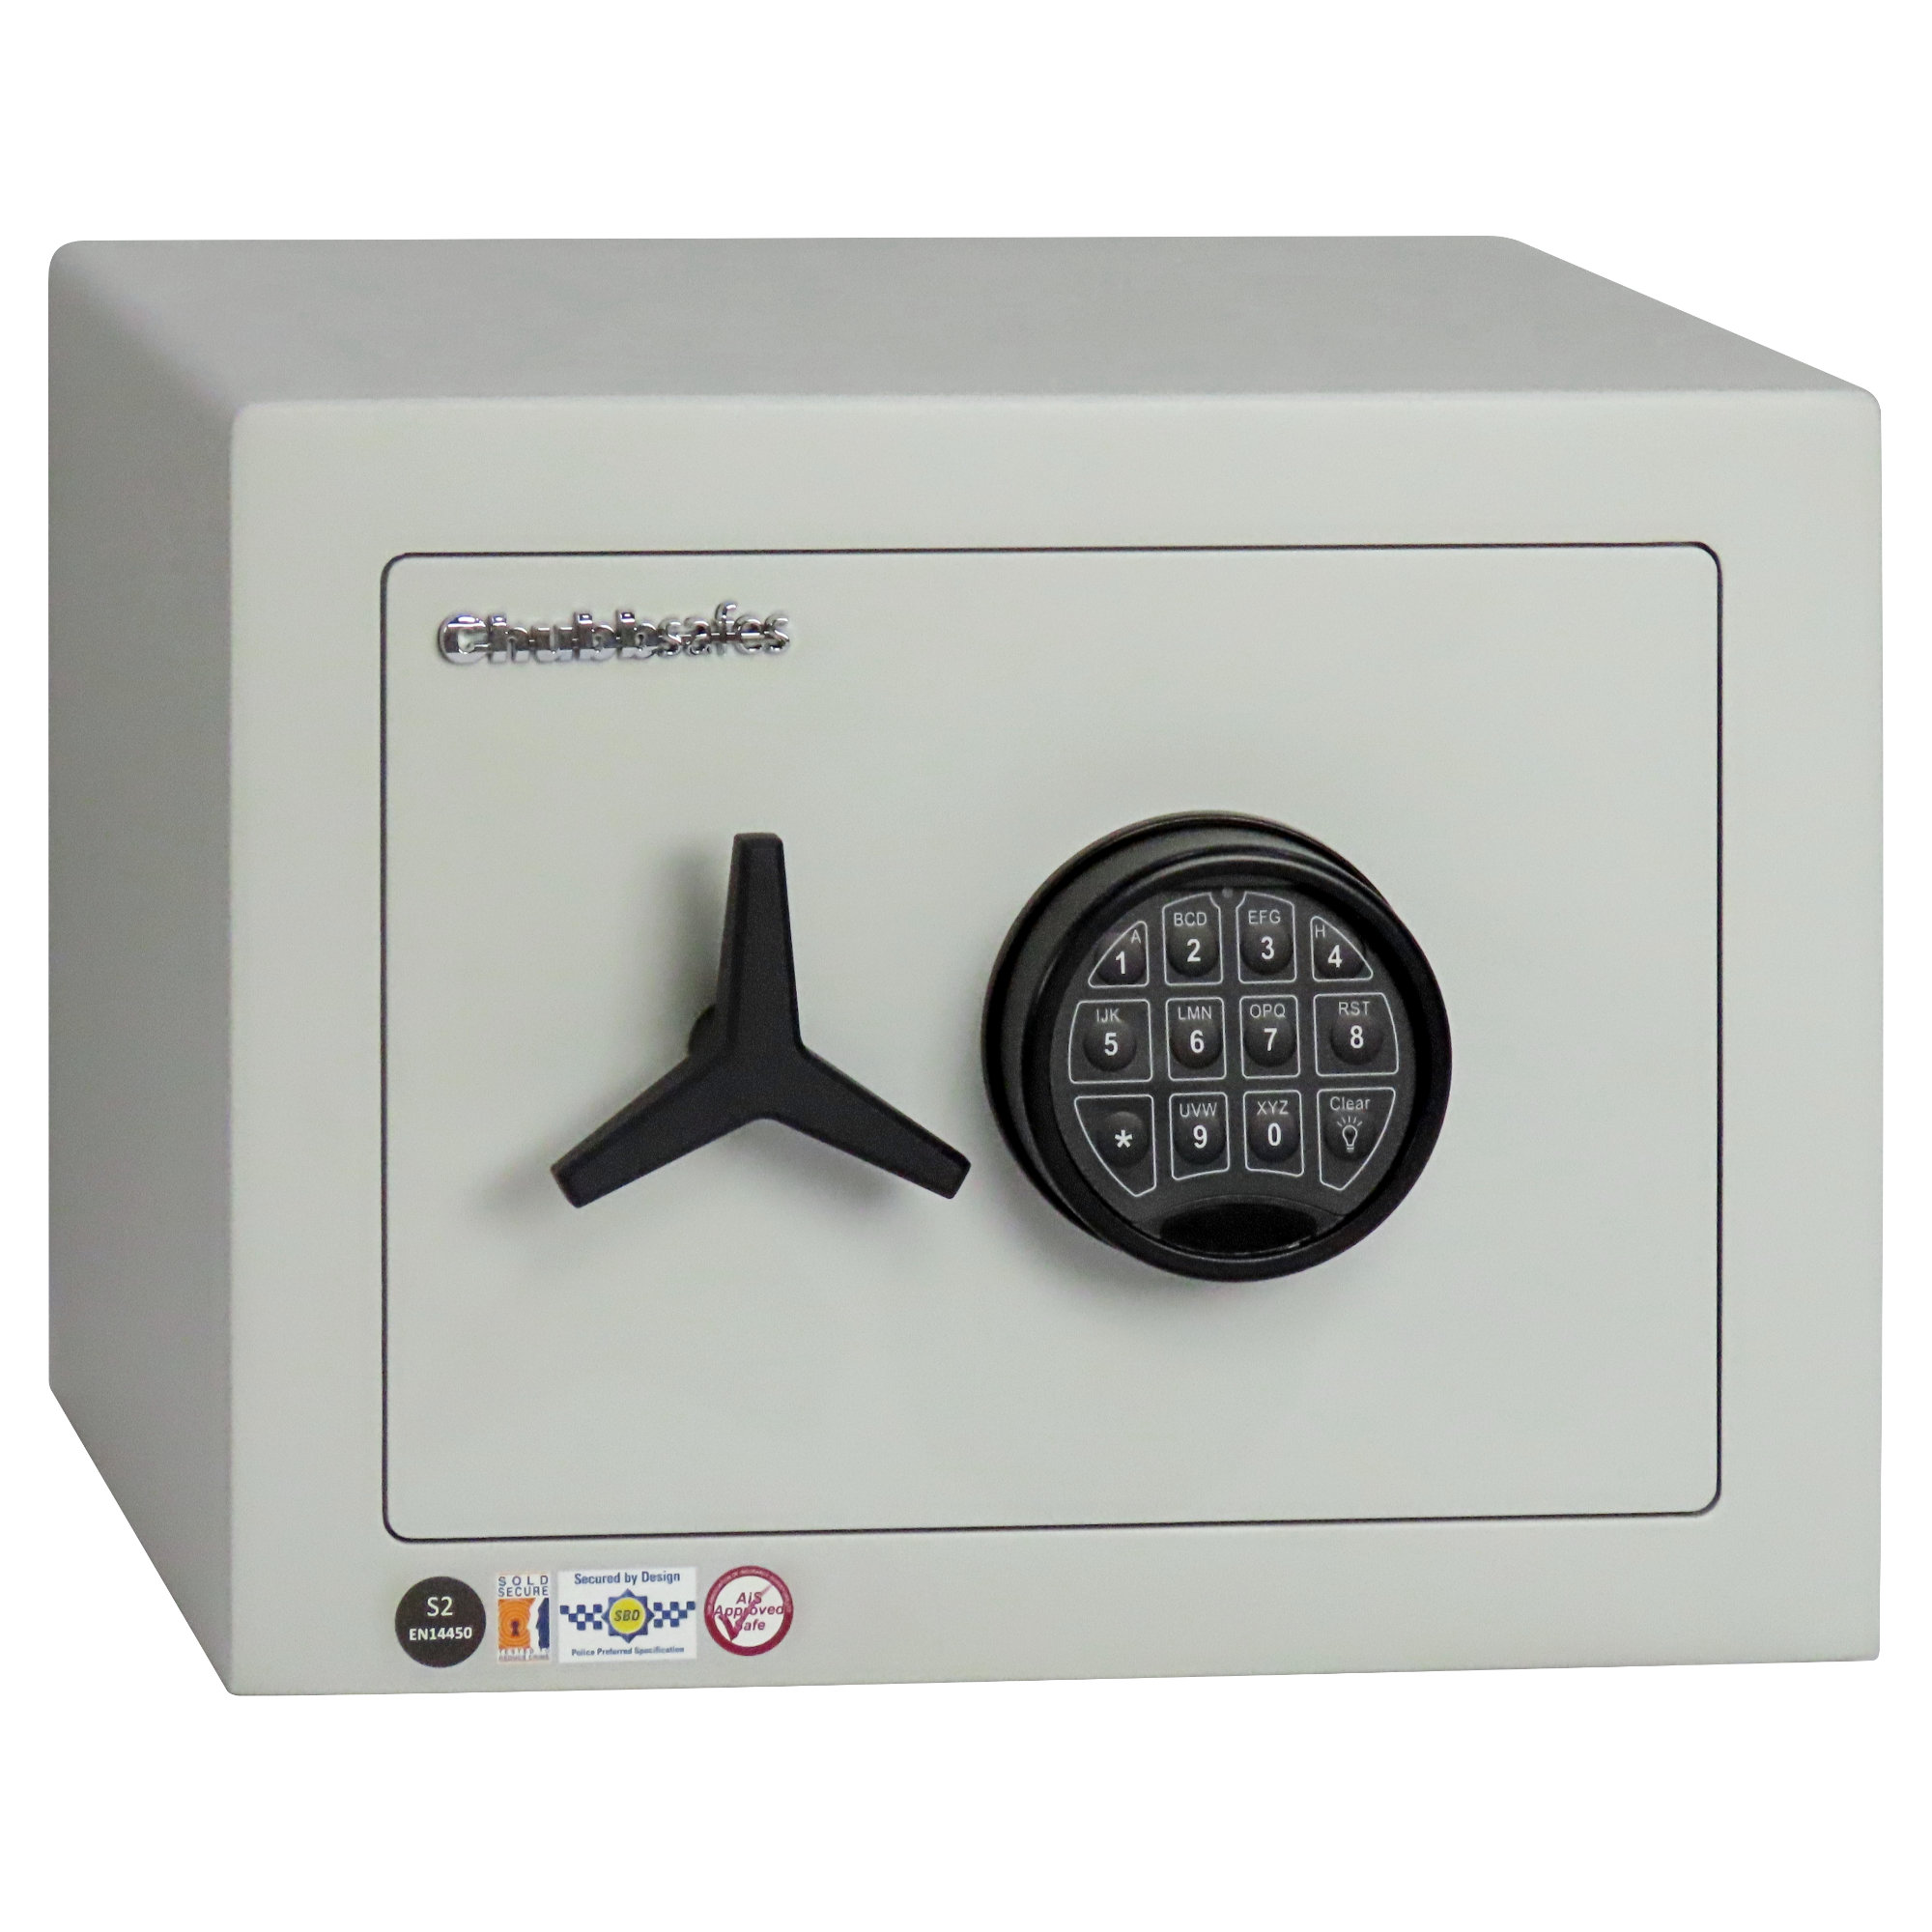 The Chubbsafes HomeVault S2 25EL is a £4000 rated security safe for the home or office safe. It features internal hinges and is secured by an electronic code lock, that has illumination and a low battery warning. The keypad is tactile and uses a 6 digit code. On correct code input, its morotised bolts are heard. This allows you to open the safe door, by turning its metal propellor shaped hande.